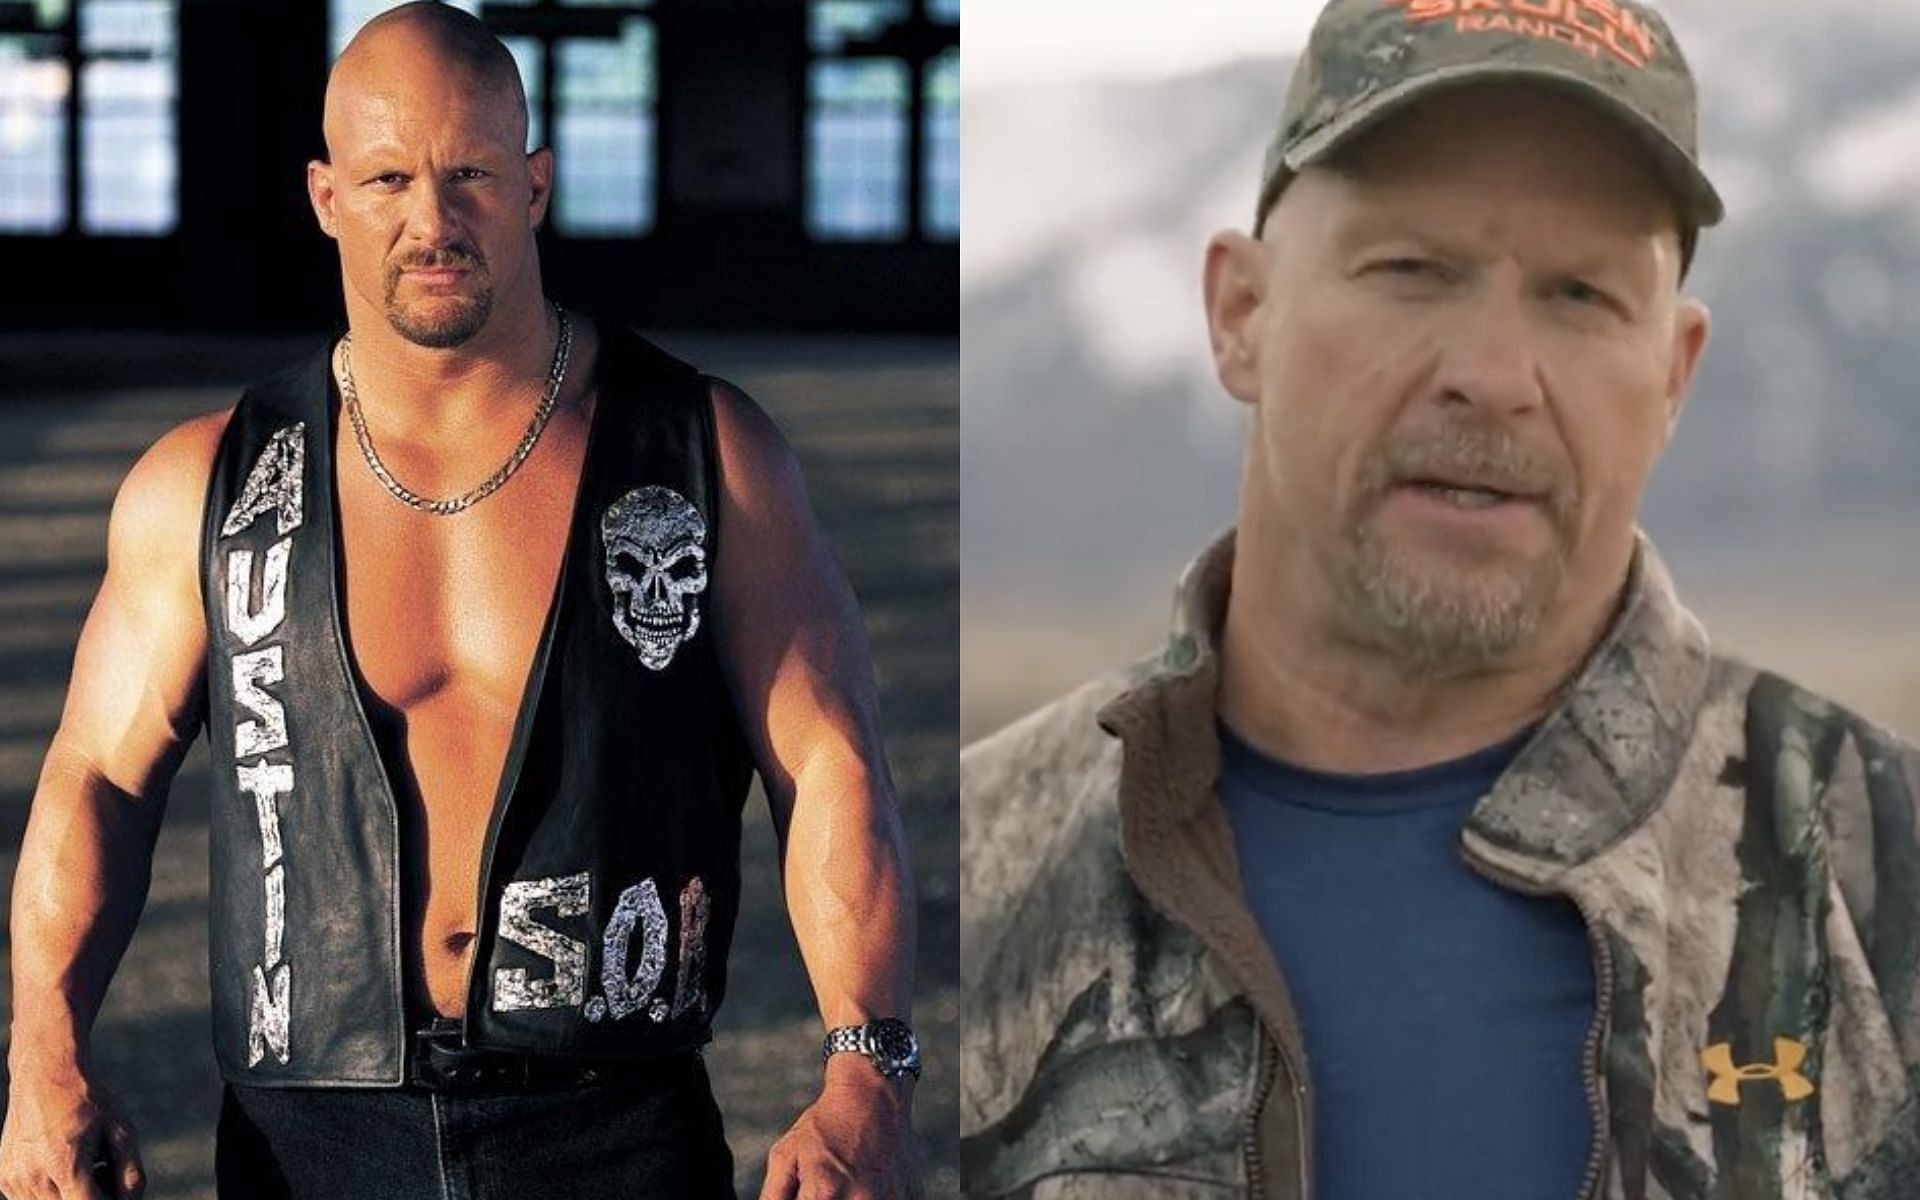 Stone Cold Steve Austin was inducted into the Hall of Fame class of 2009